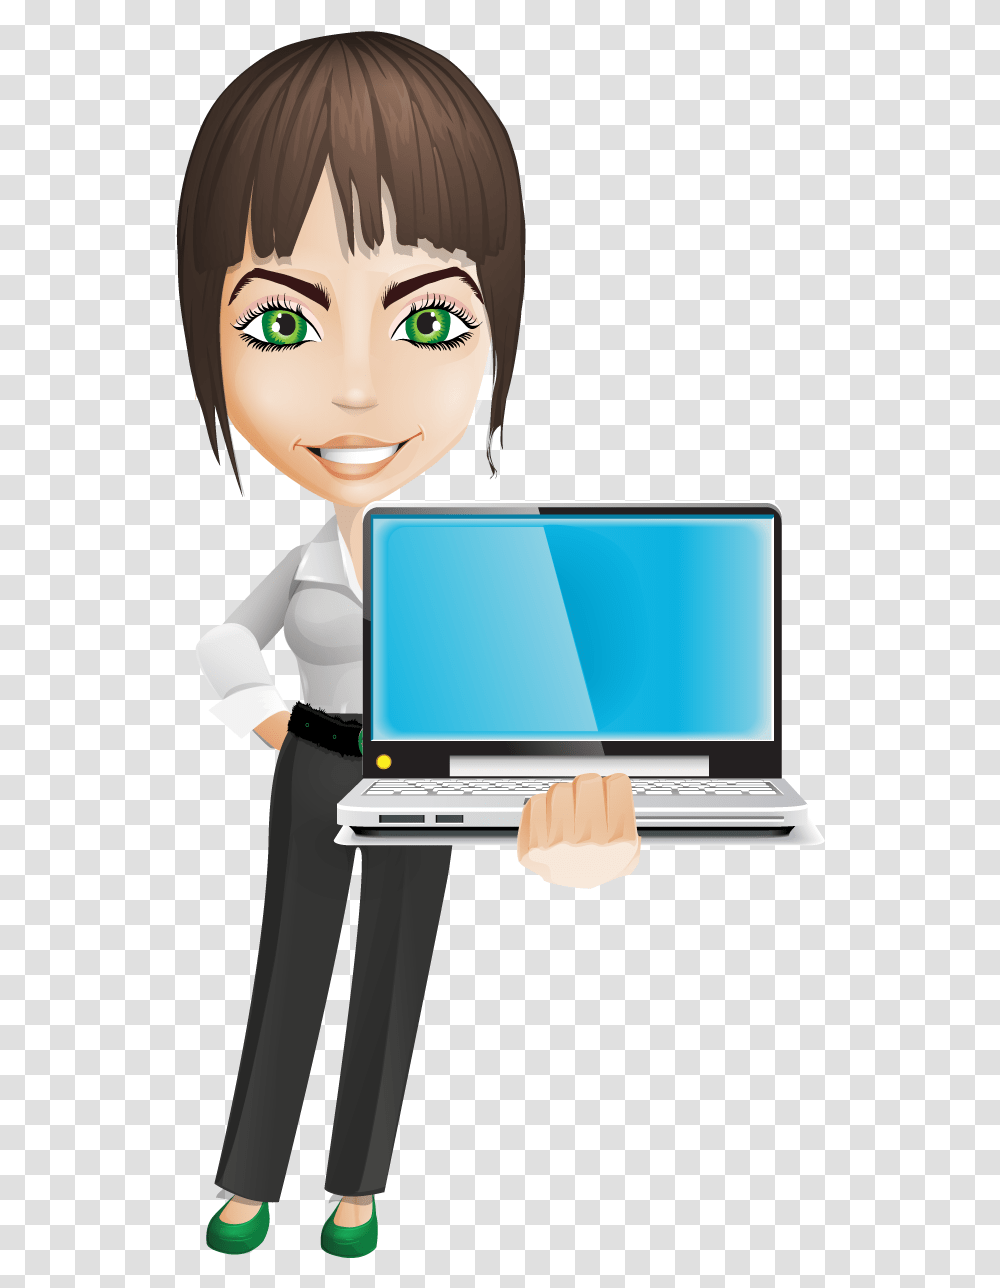 Image For Free 3d Girl Holding Laptop Clip Art Cartoon, Pc, Computer, Electronics, Computer Keyboard Transparent Png